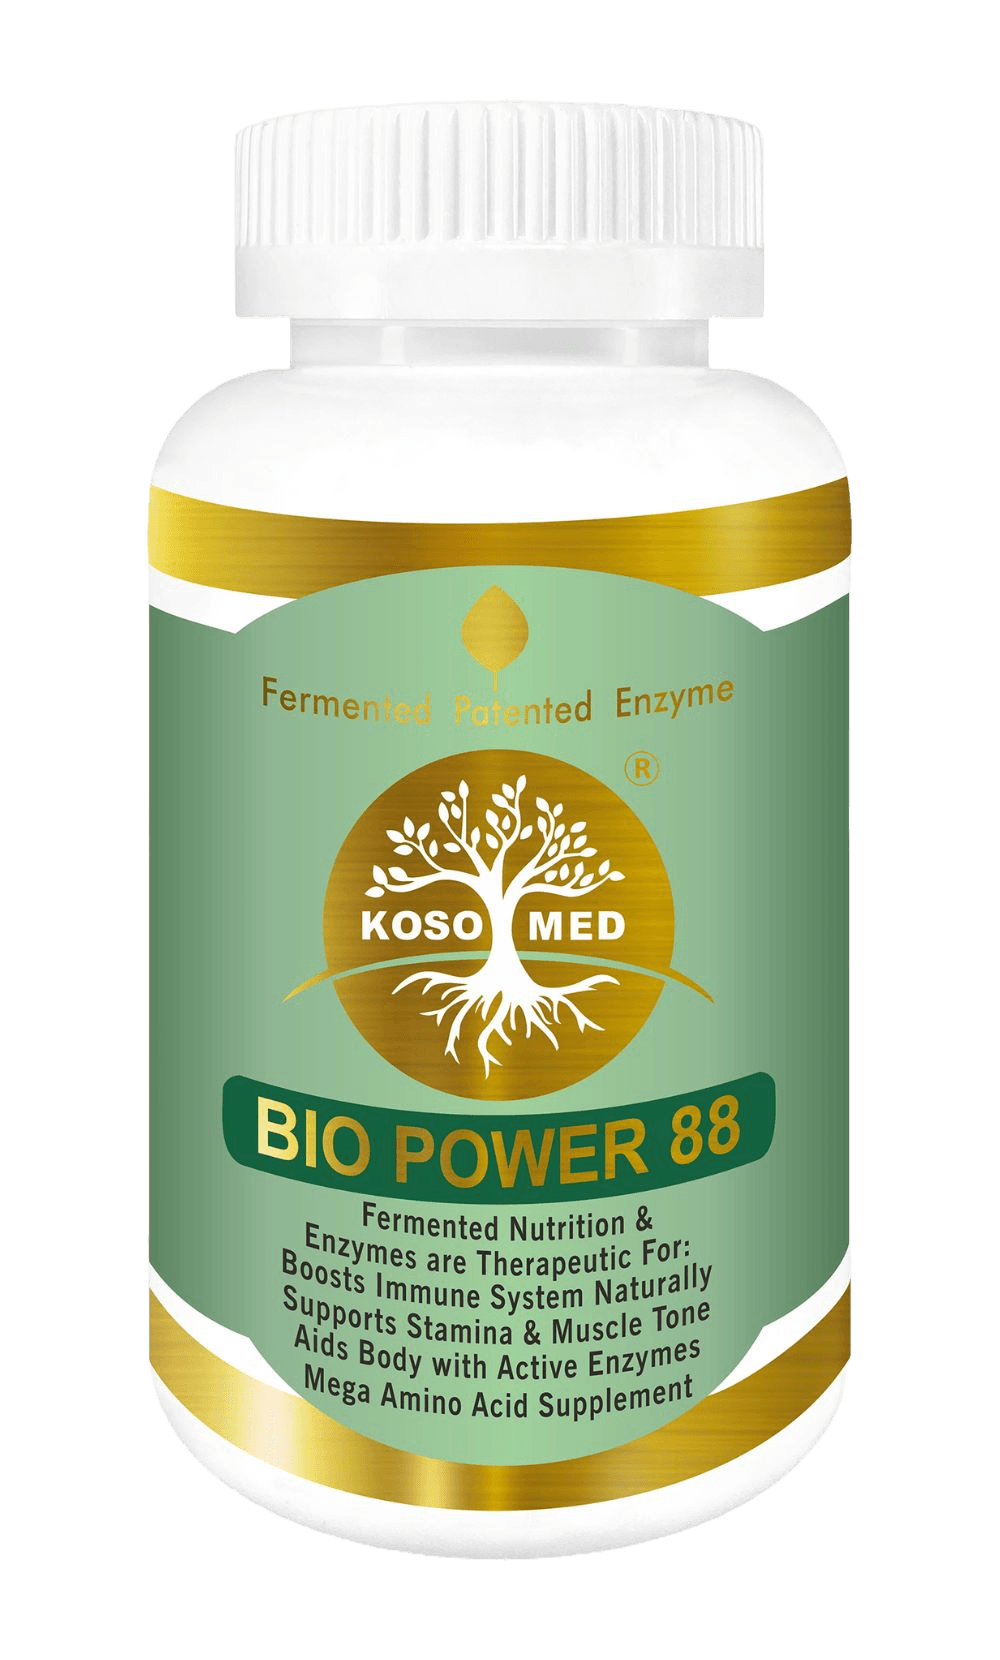 Koso Med Bio Power 88 - Energize Your Life.